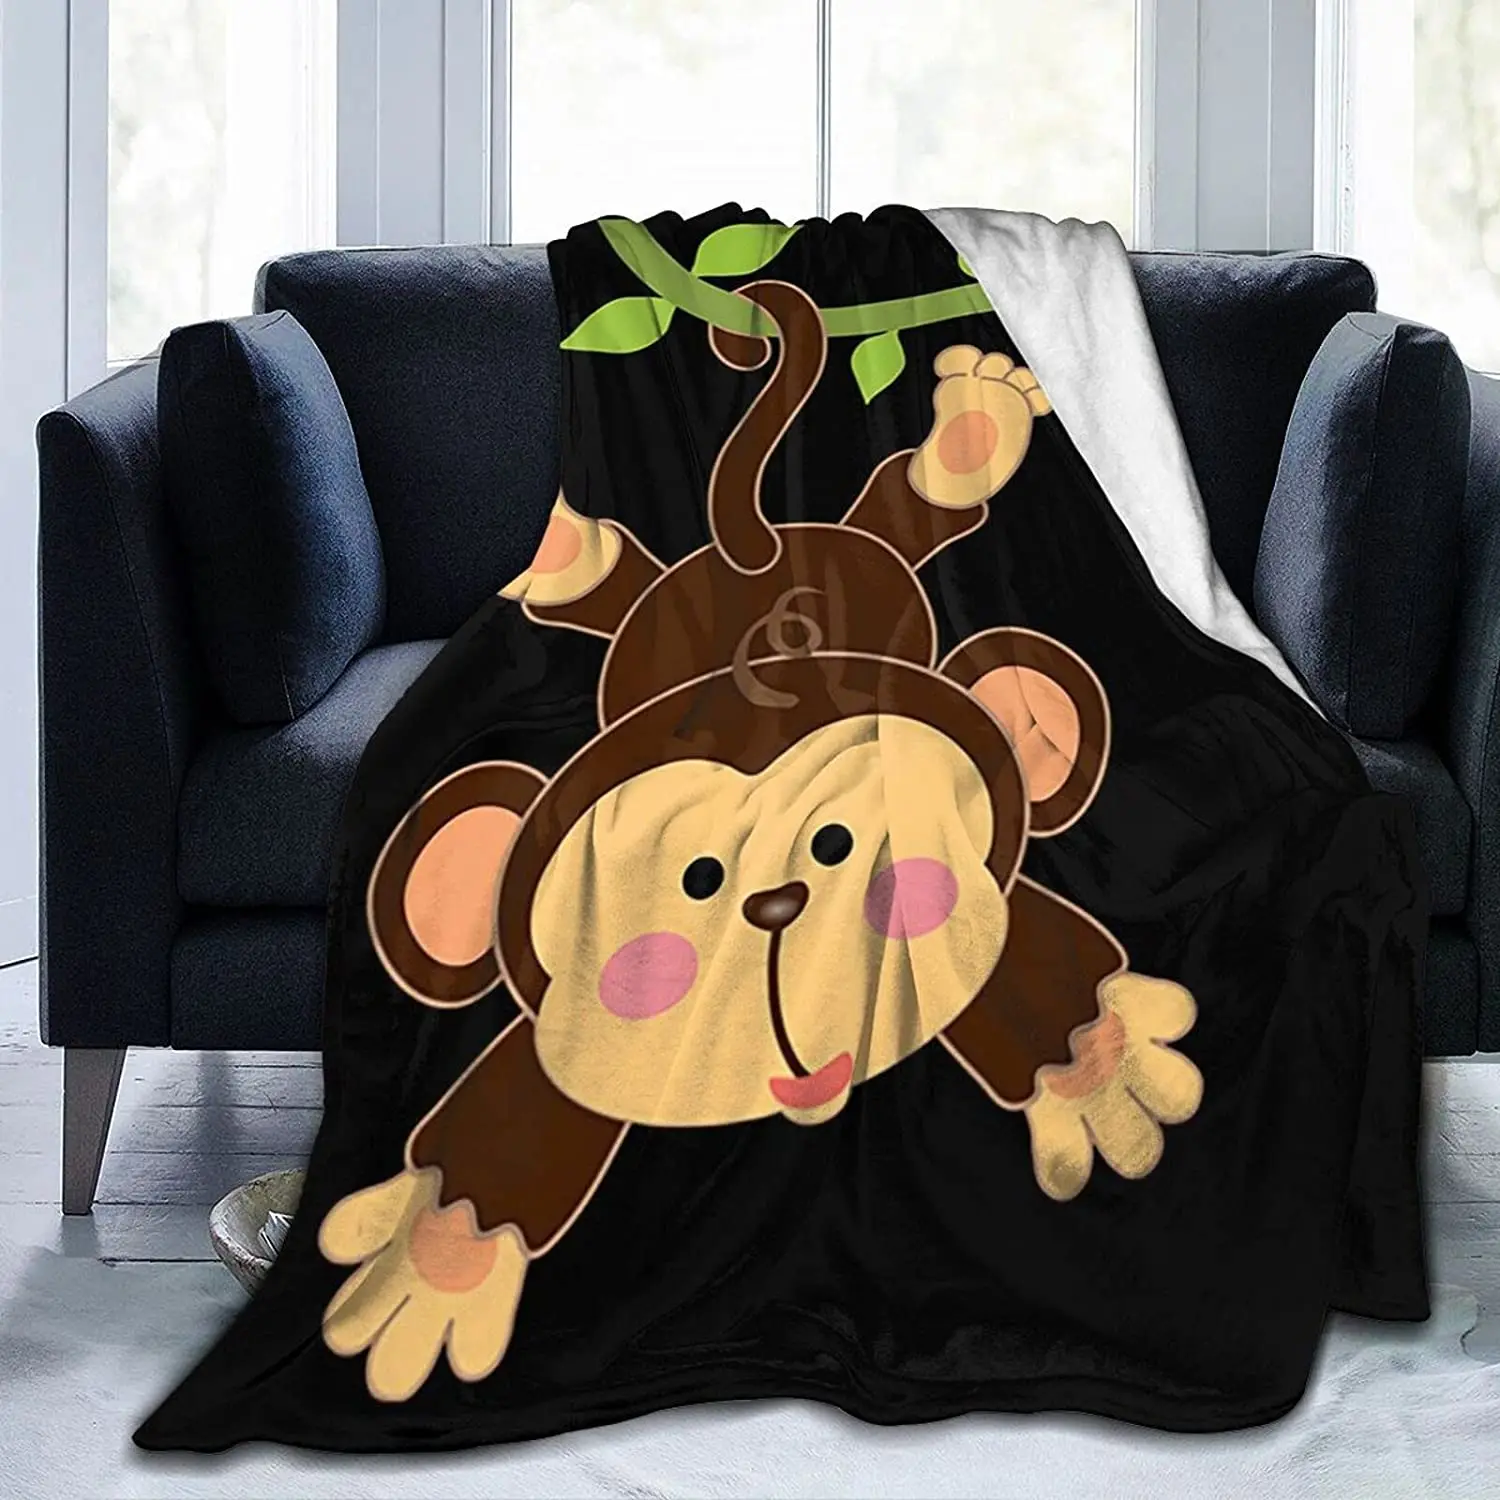 

Flannel Fleece Blanket - Monkey Throw Blanket for Bedroom Couch Travelling,Comfortable All Season Air Conditioning Blanket